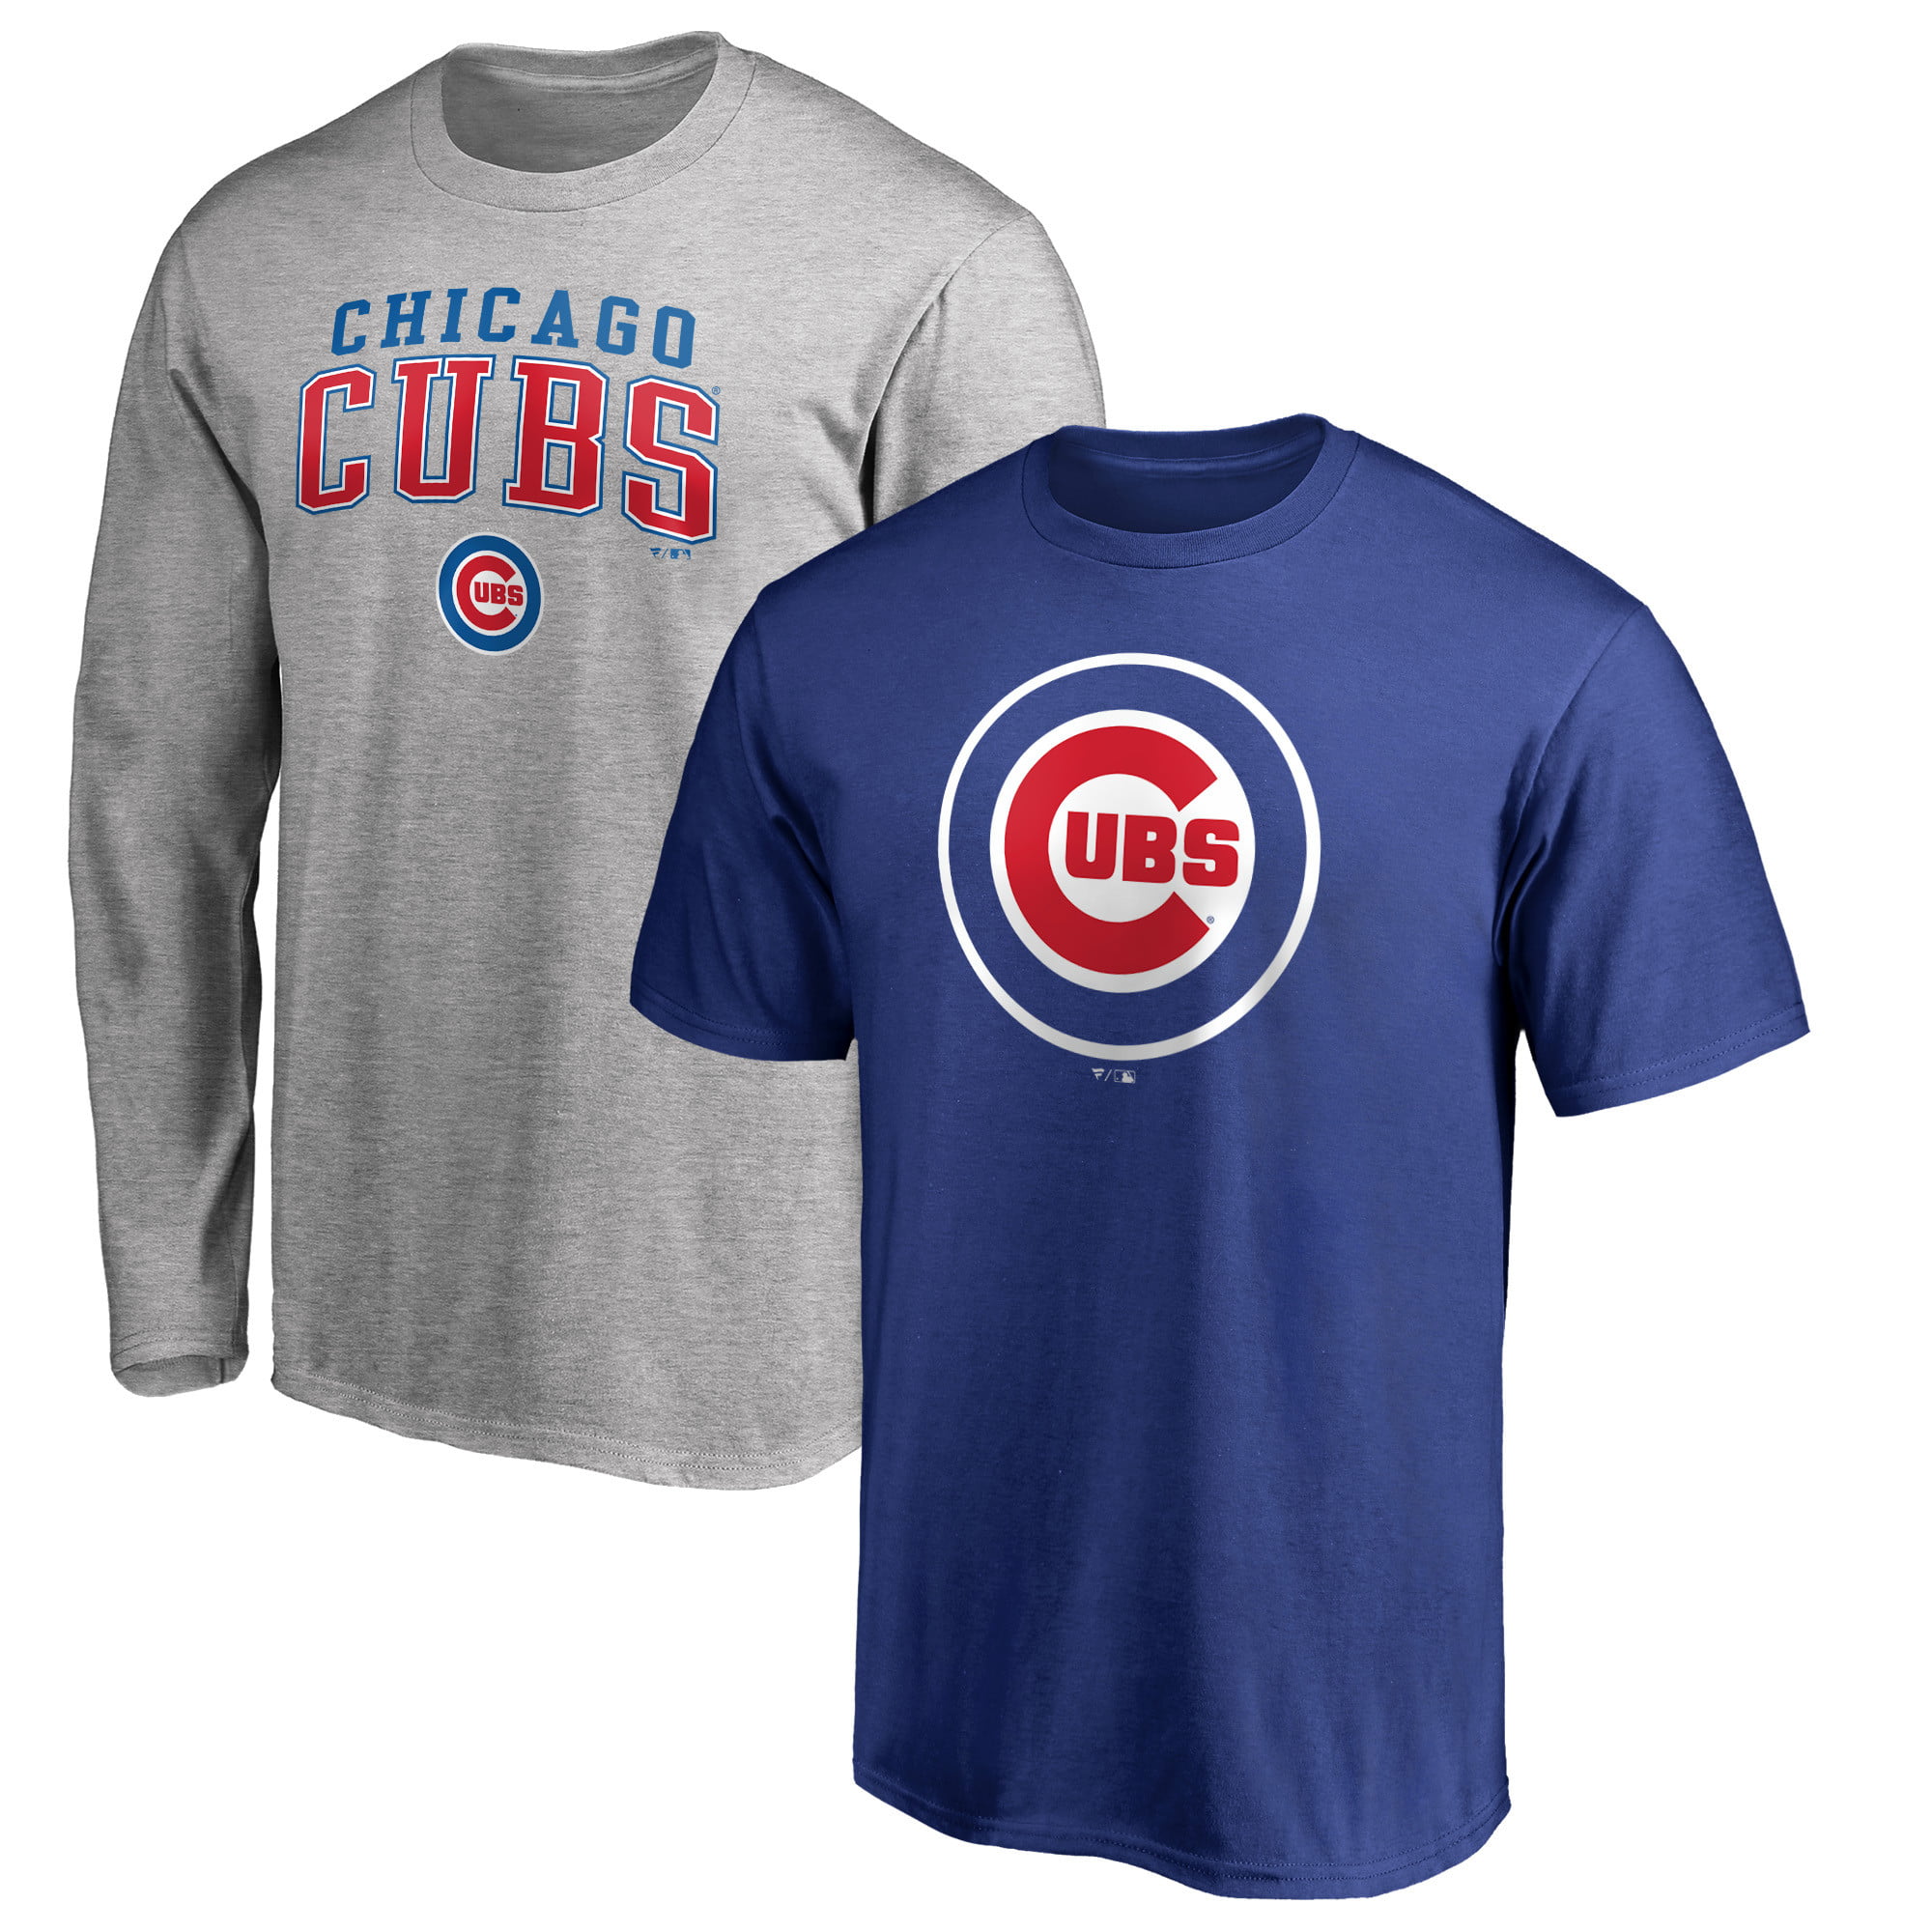 Chicago Cubs Iconic Supporters Cotton Jersey Shirt 